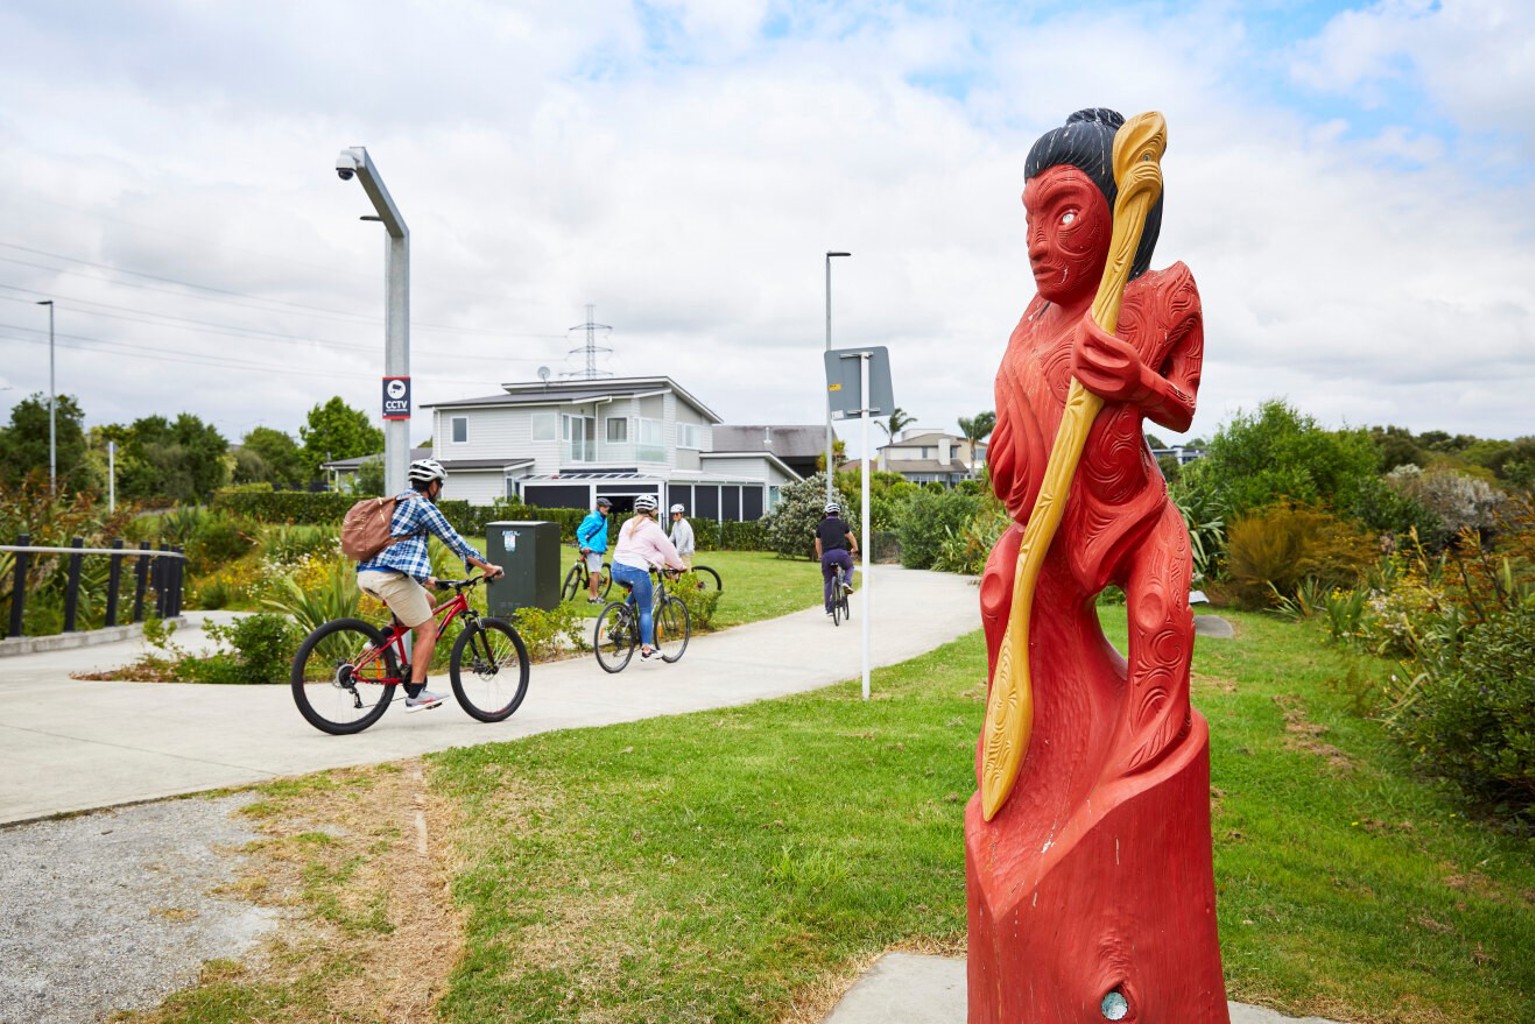 Cyclists riding along a concrete path with a Māori statue in the foreground